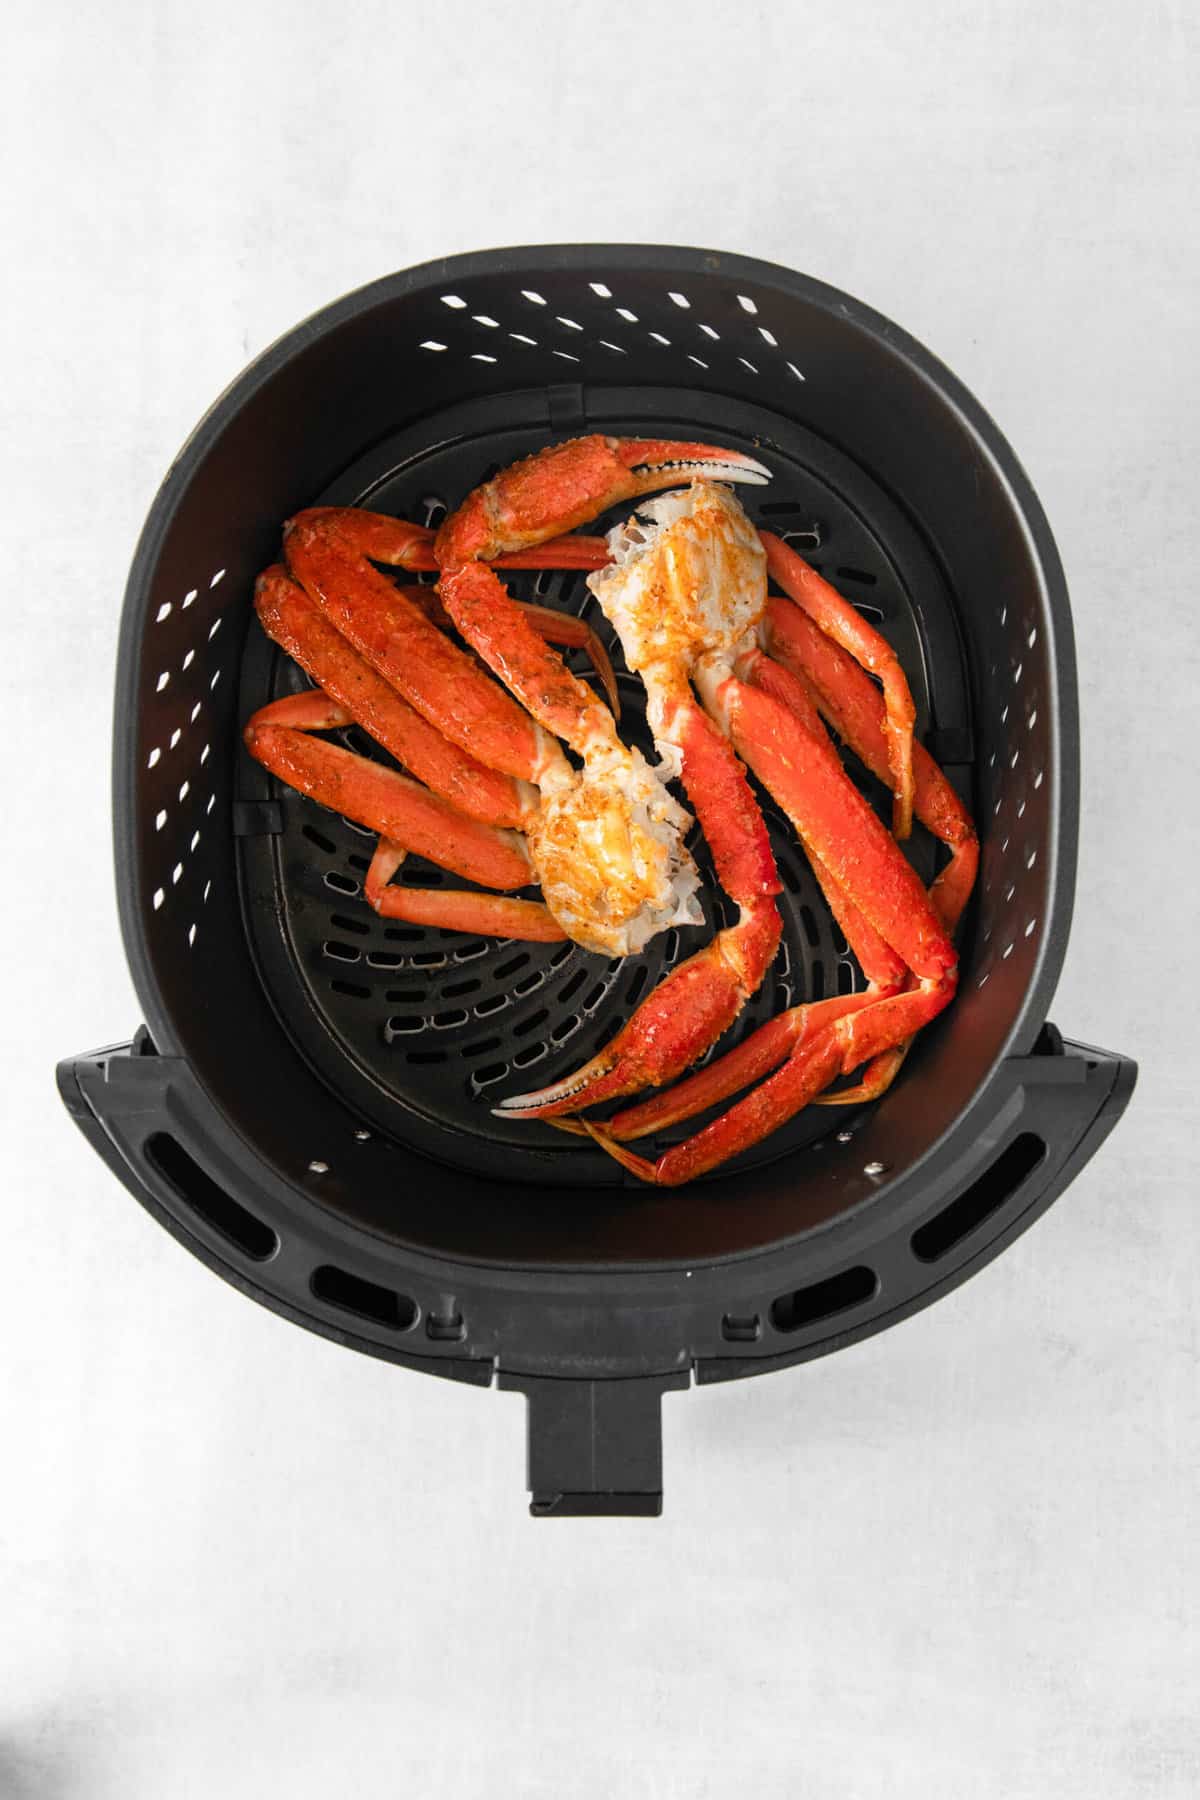 Snow crab legs in the basket of an air fryer.